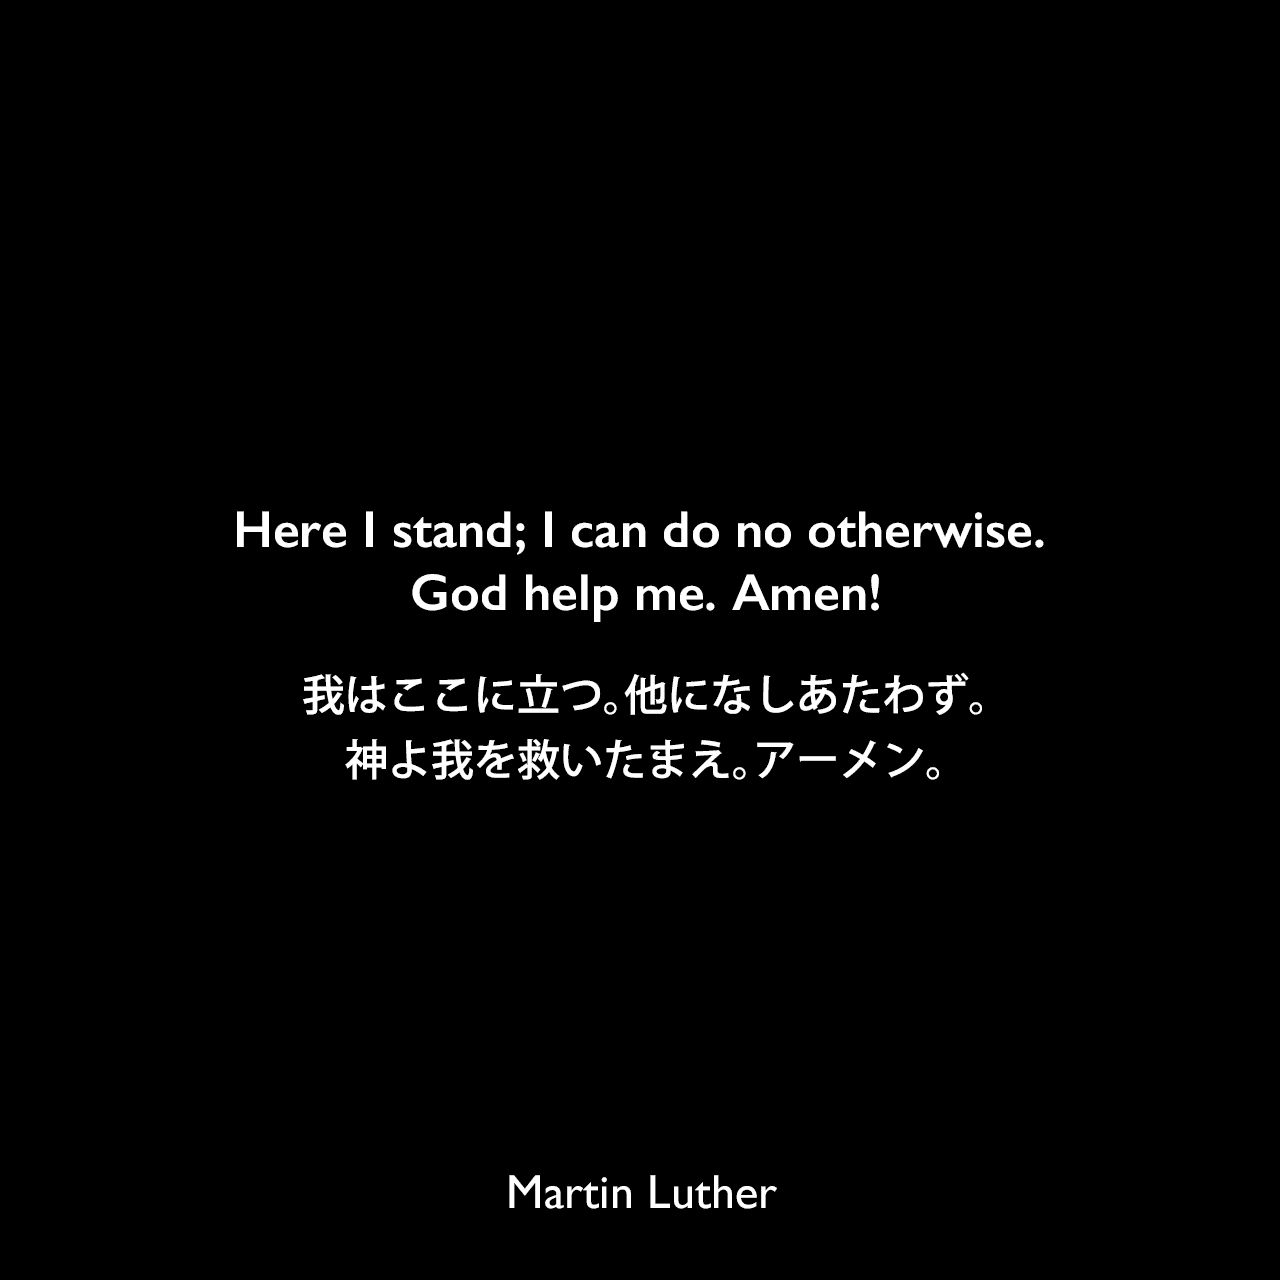 Here I stand; I can do no otherwise. God help me. Amen!我はここに立つ。他になしあたわず。神よ我を救いたまえ。アーメン。- 1521年ヴォルムス帝国議会でのスピーチよりMartin Luther